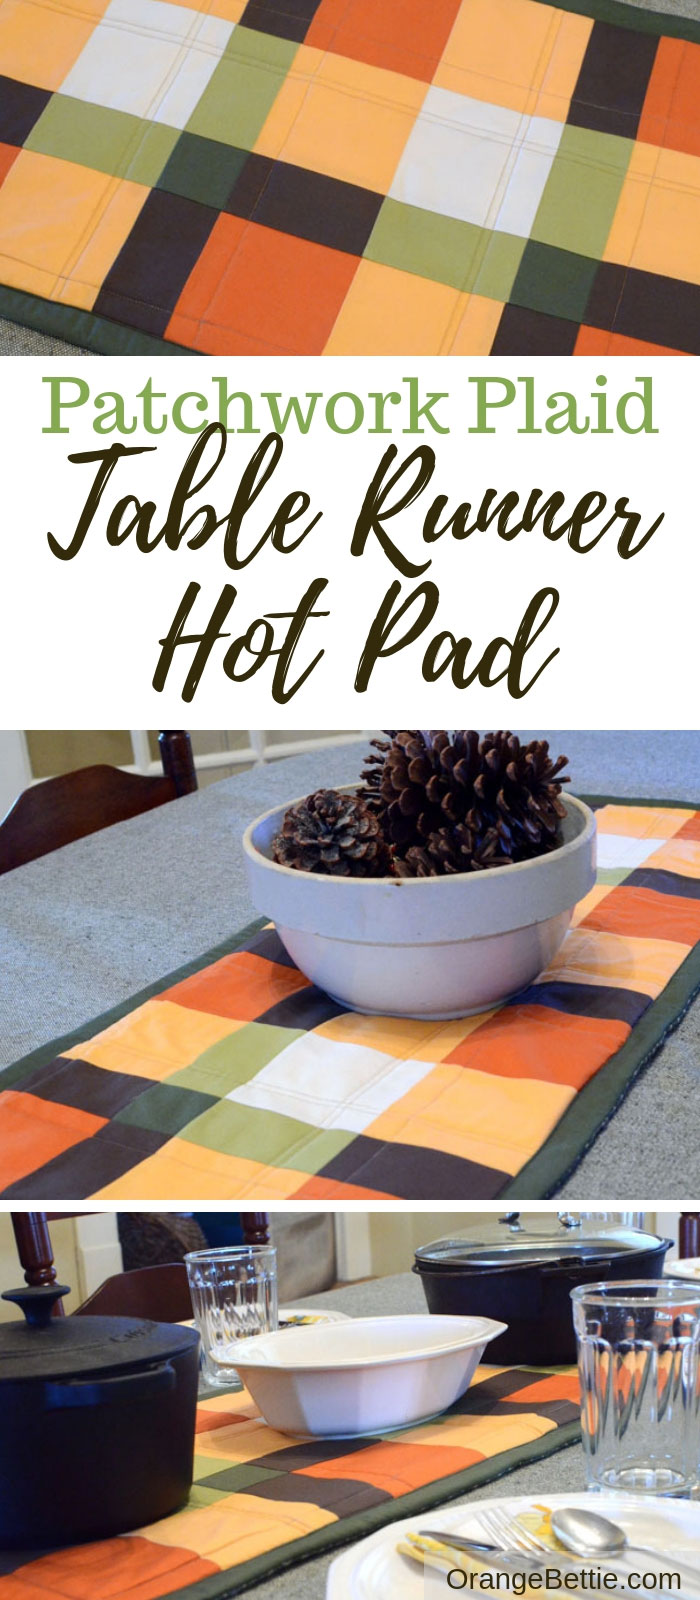 Patchwork Plaid Table Runner Hot Pad